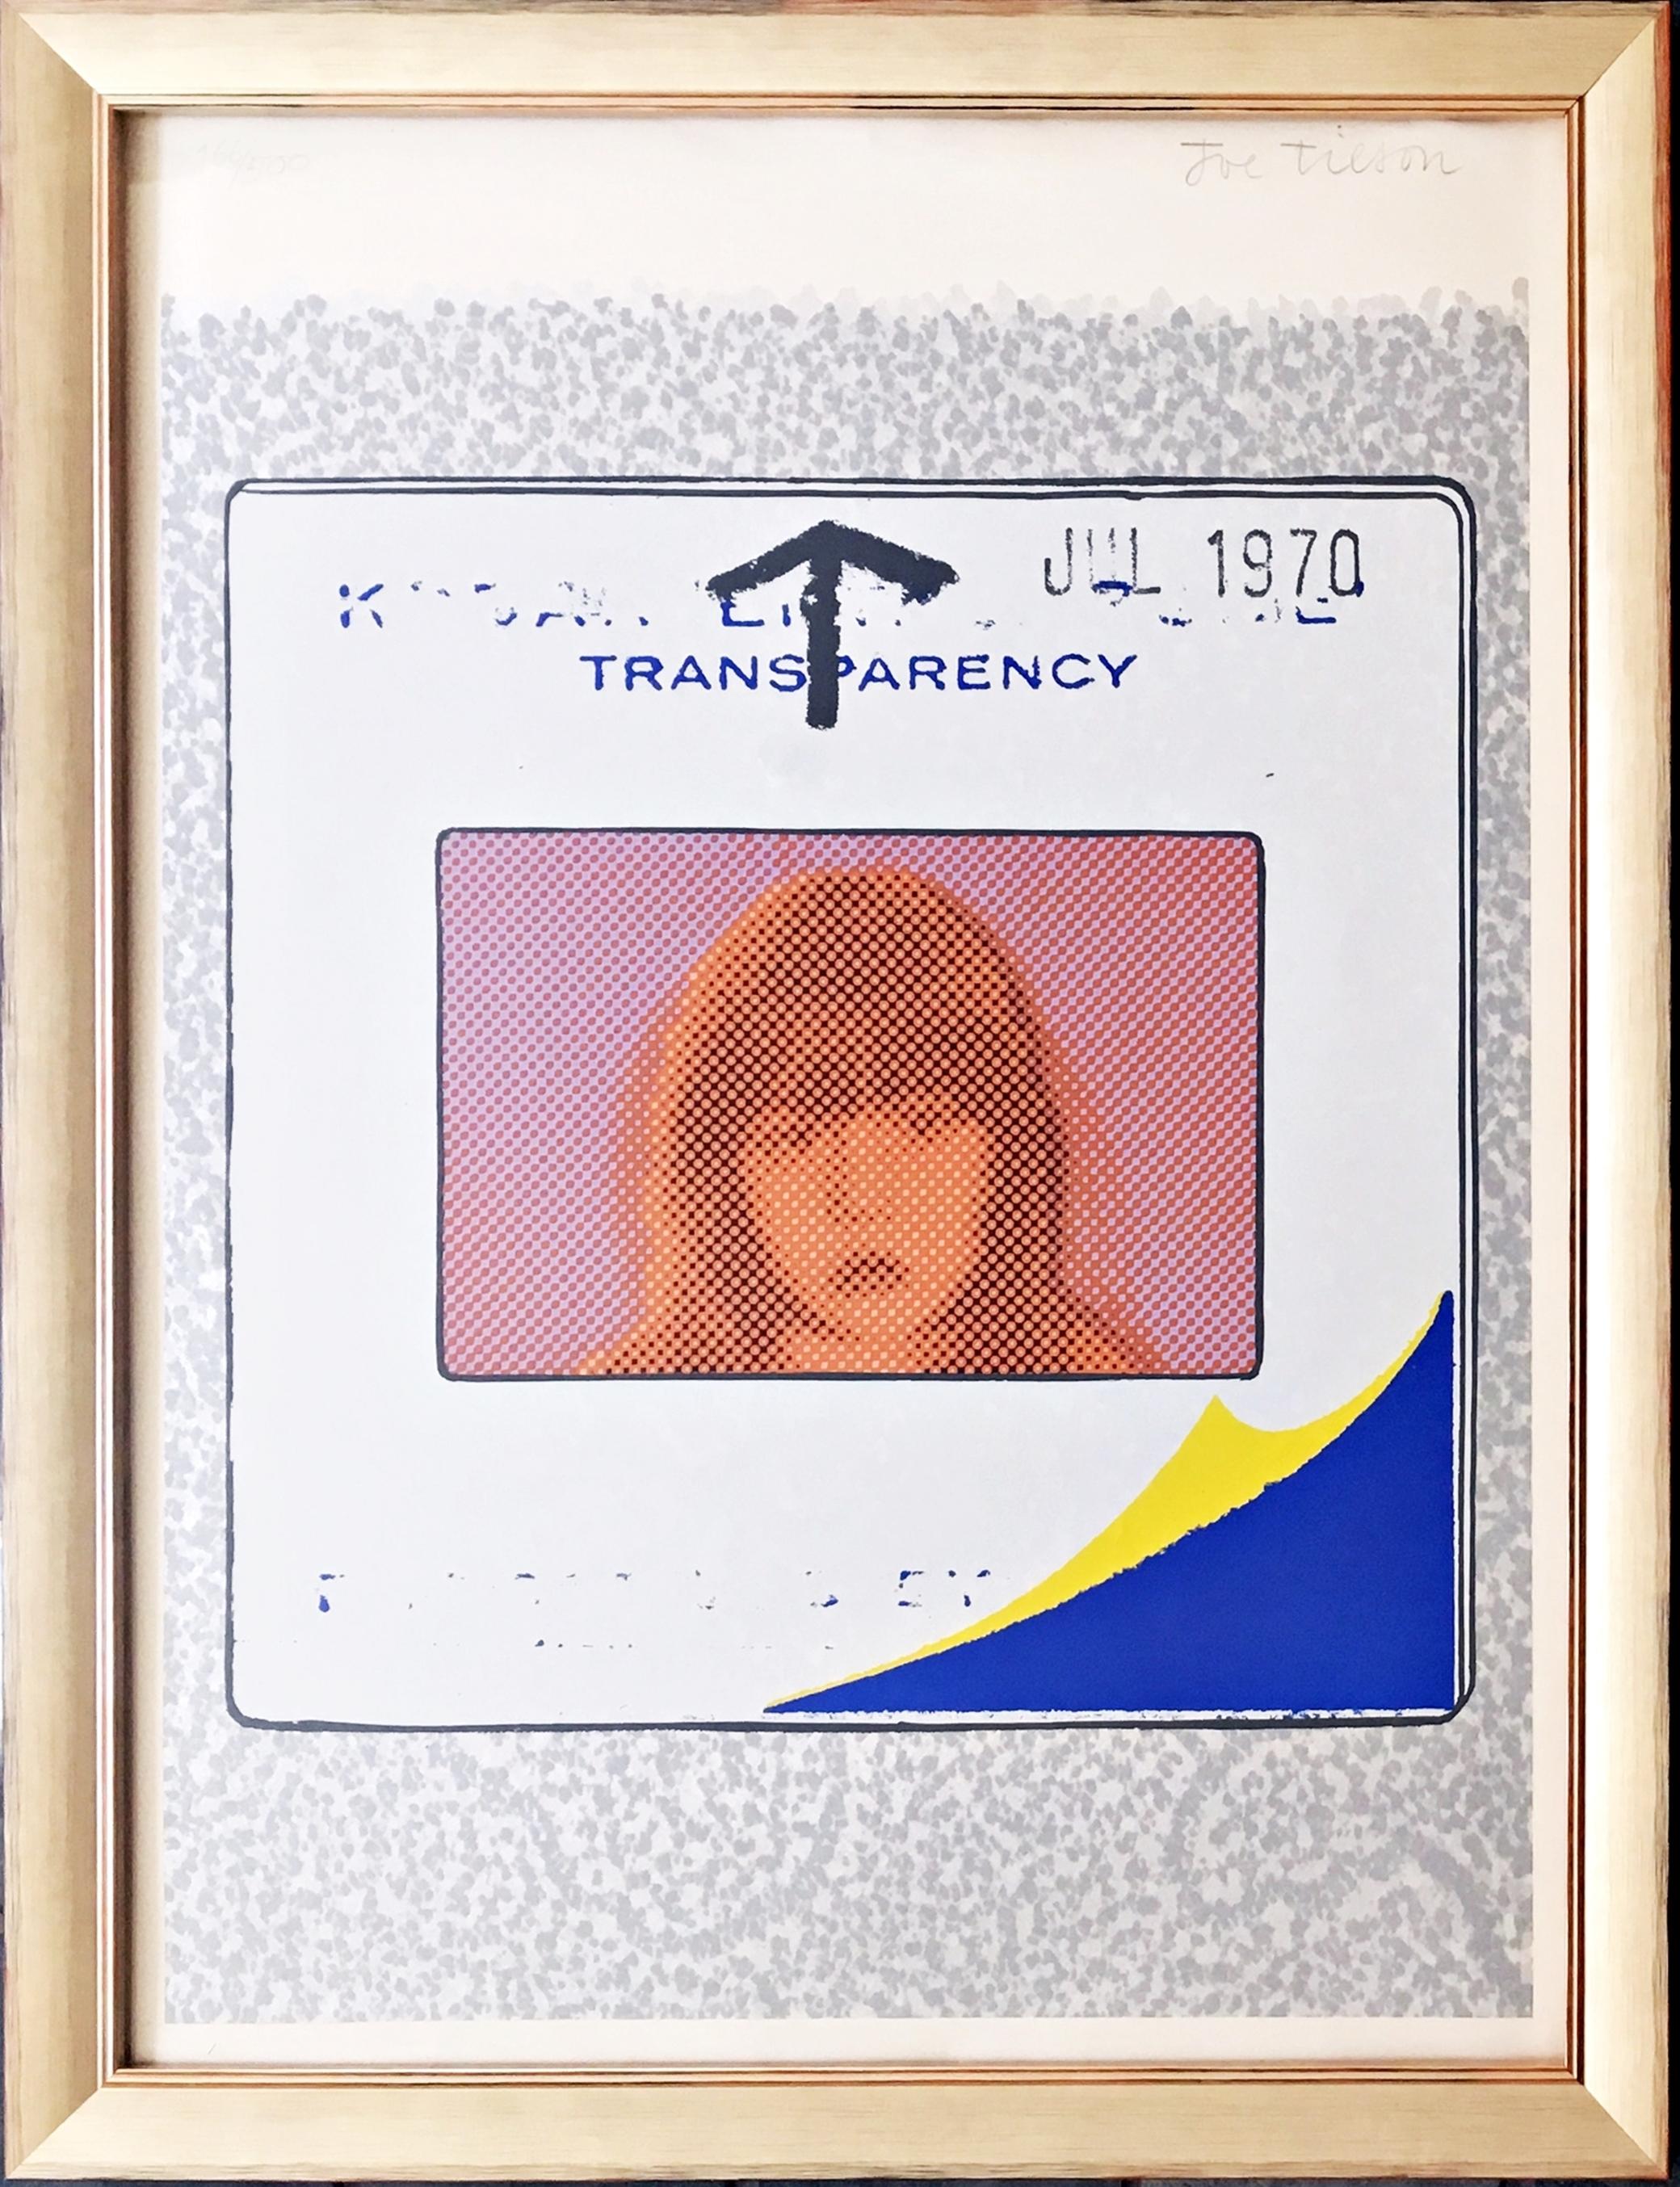 Transparency, signed limited edition print from pioneering British Pop Artist